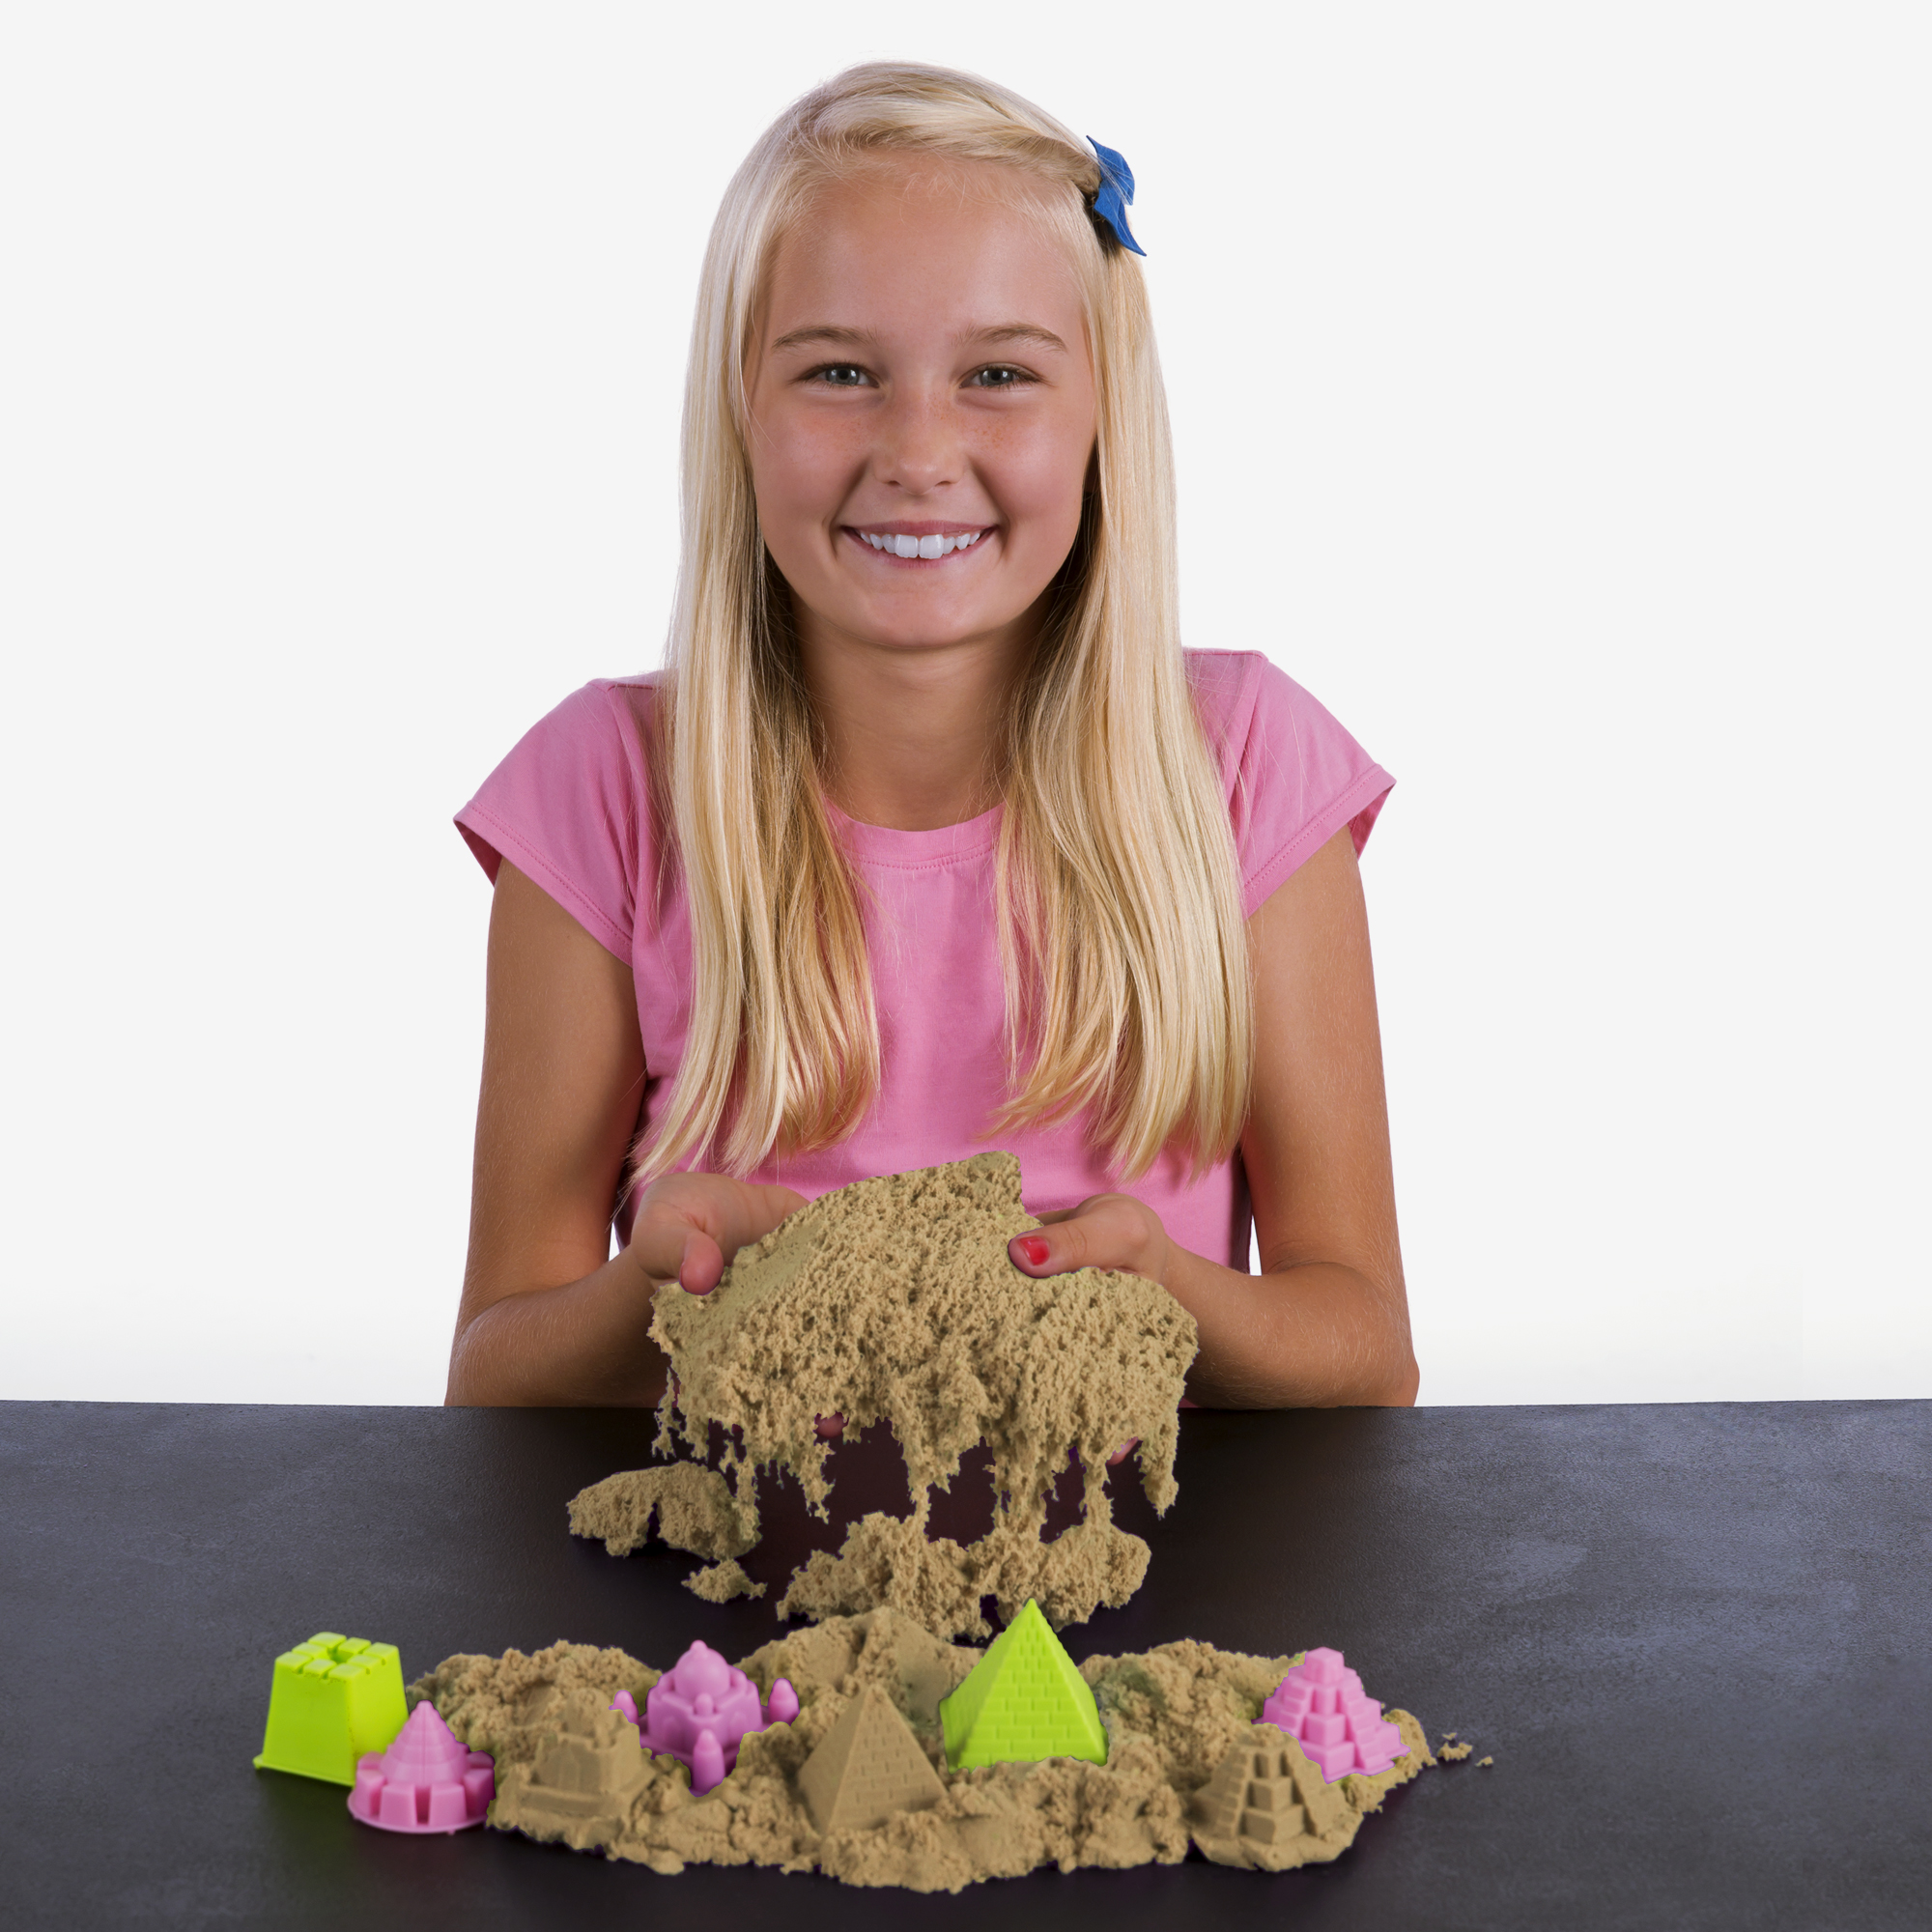 National Geographic Play Sand - 6 lbs of Sand with Castle Molds (Natural Sand color) - A Fun Sensory Sand Activity - image 3 of 7